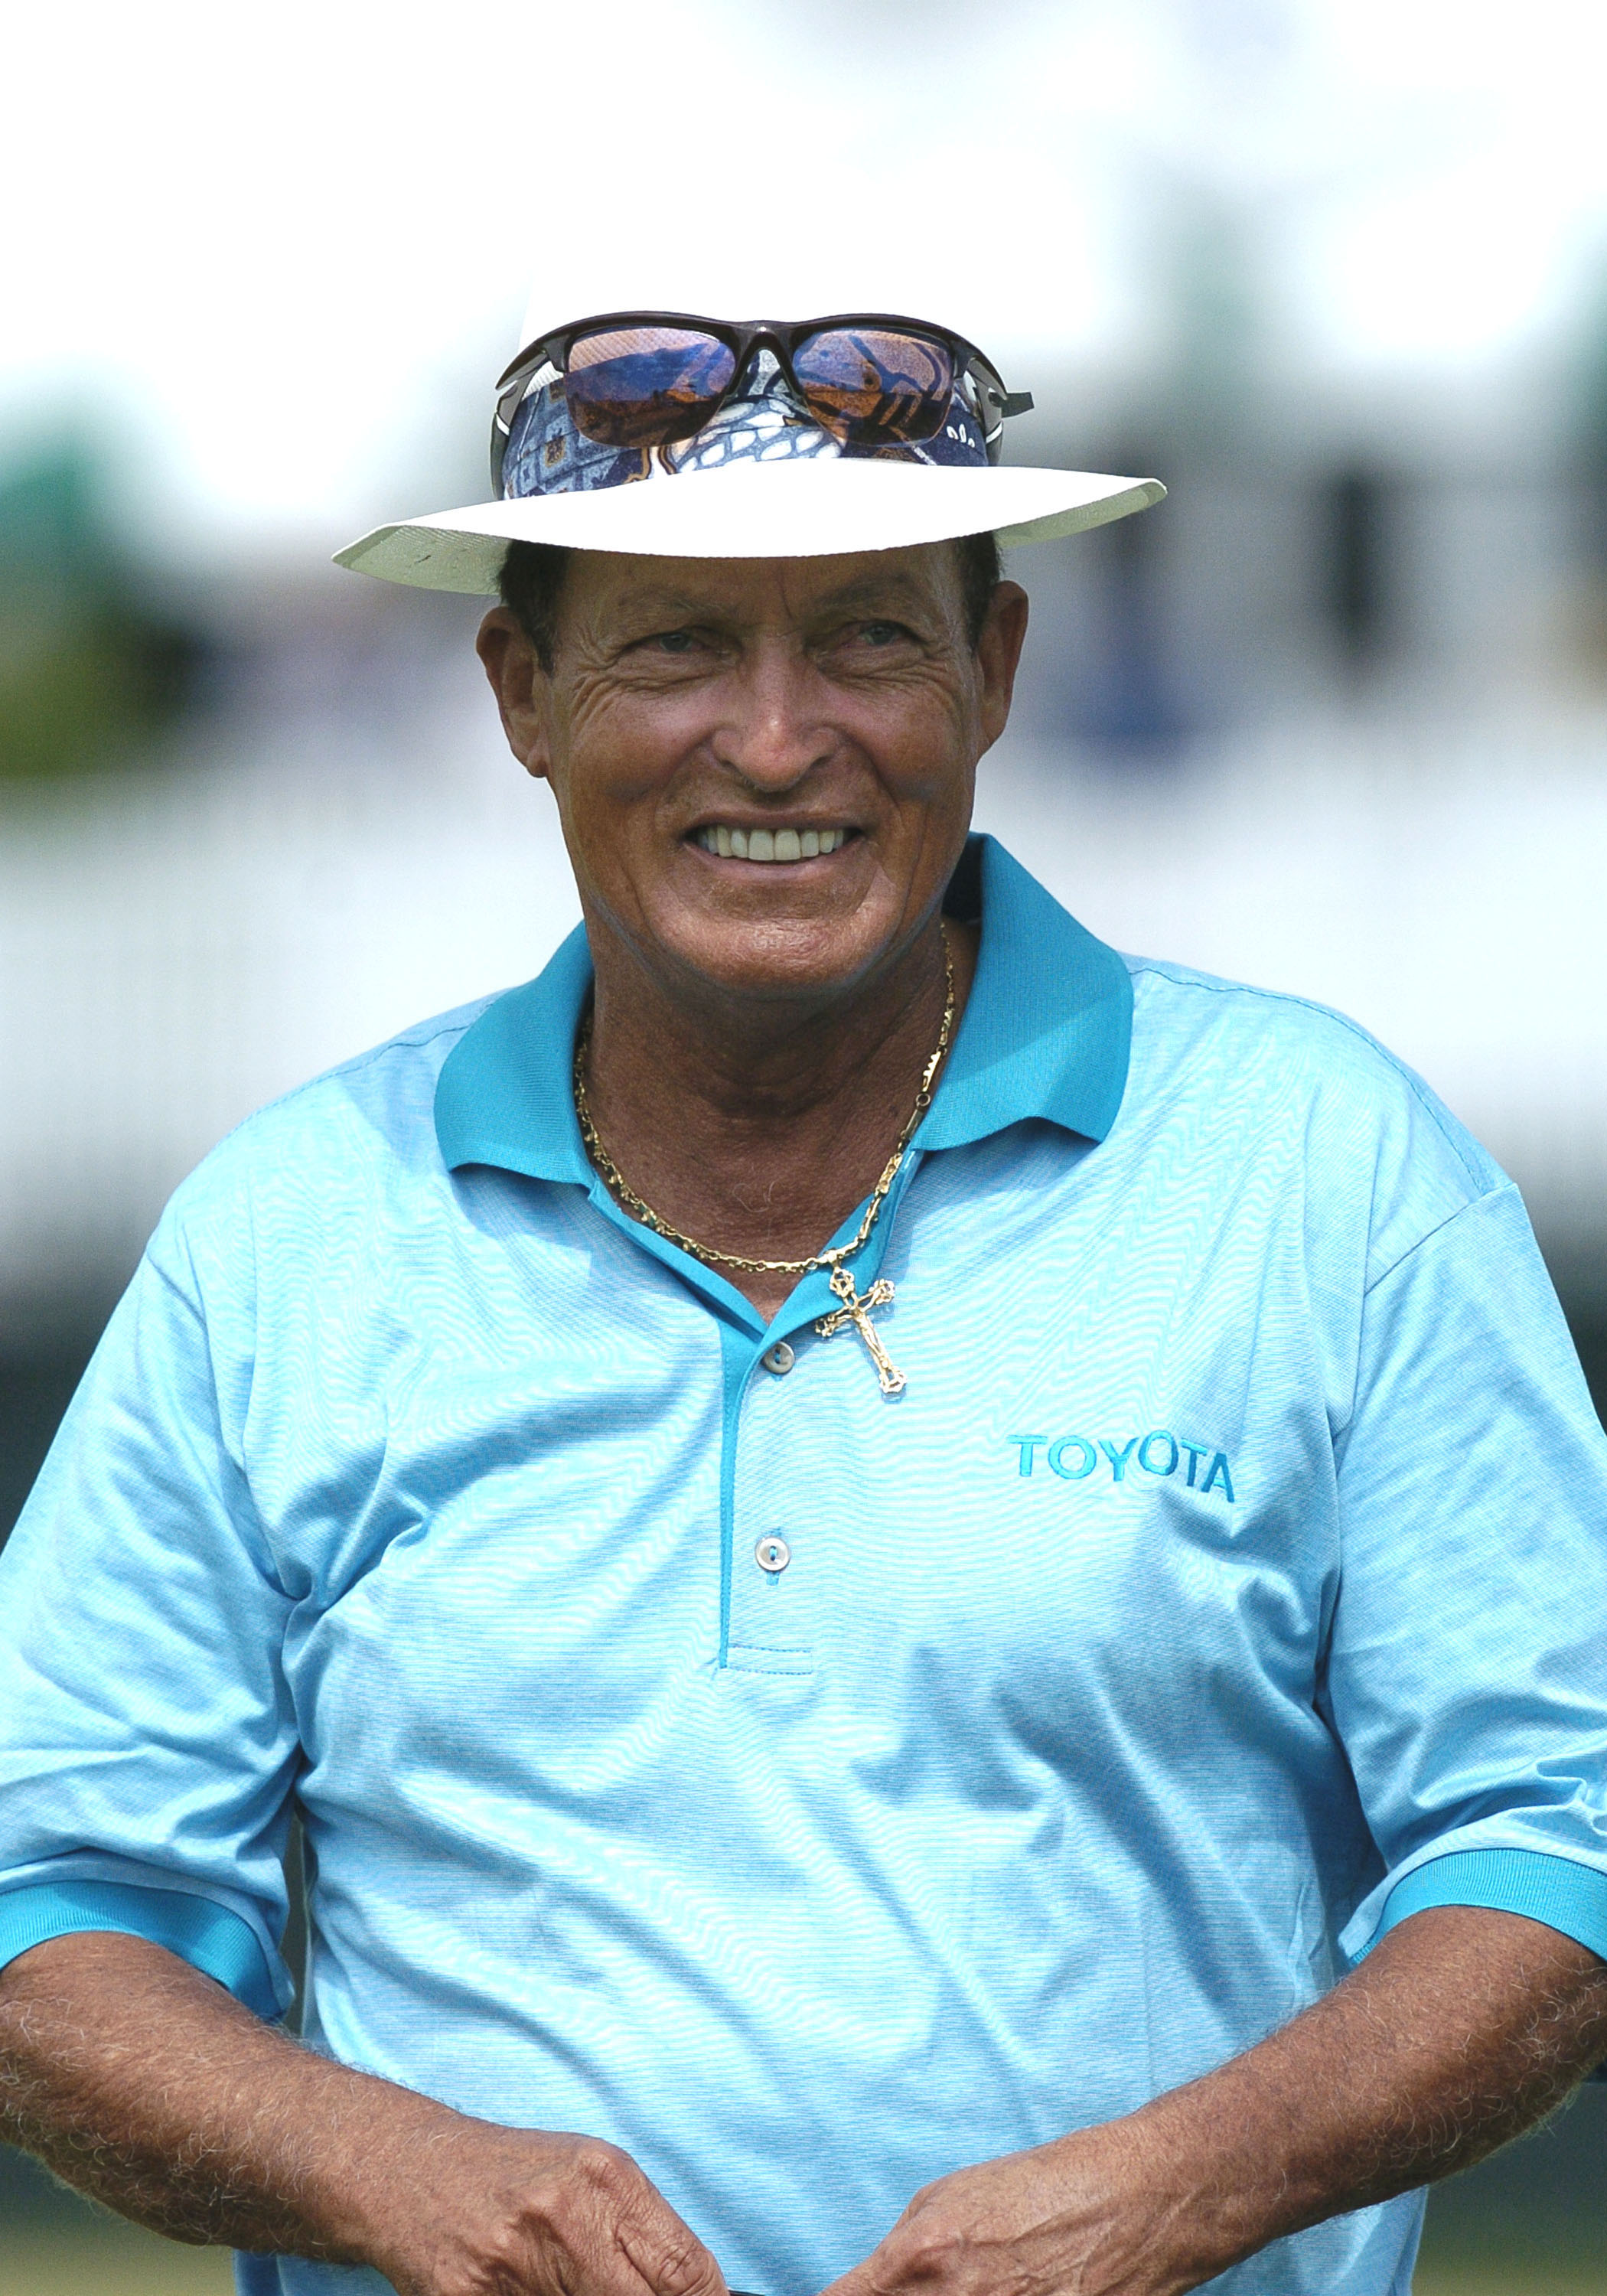 Chi Chi Rodriguez competes in the first round of the Liberty Mutual Legends of Golf tournament, Friday, April 23, 2004 in Savannah, Georgia. (Photo by A. Messerschmidt/Getty Images)